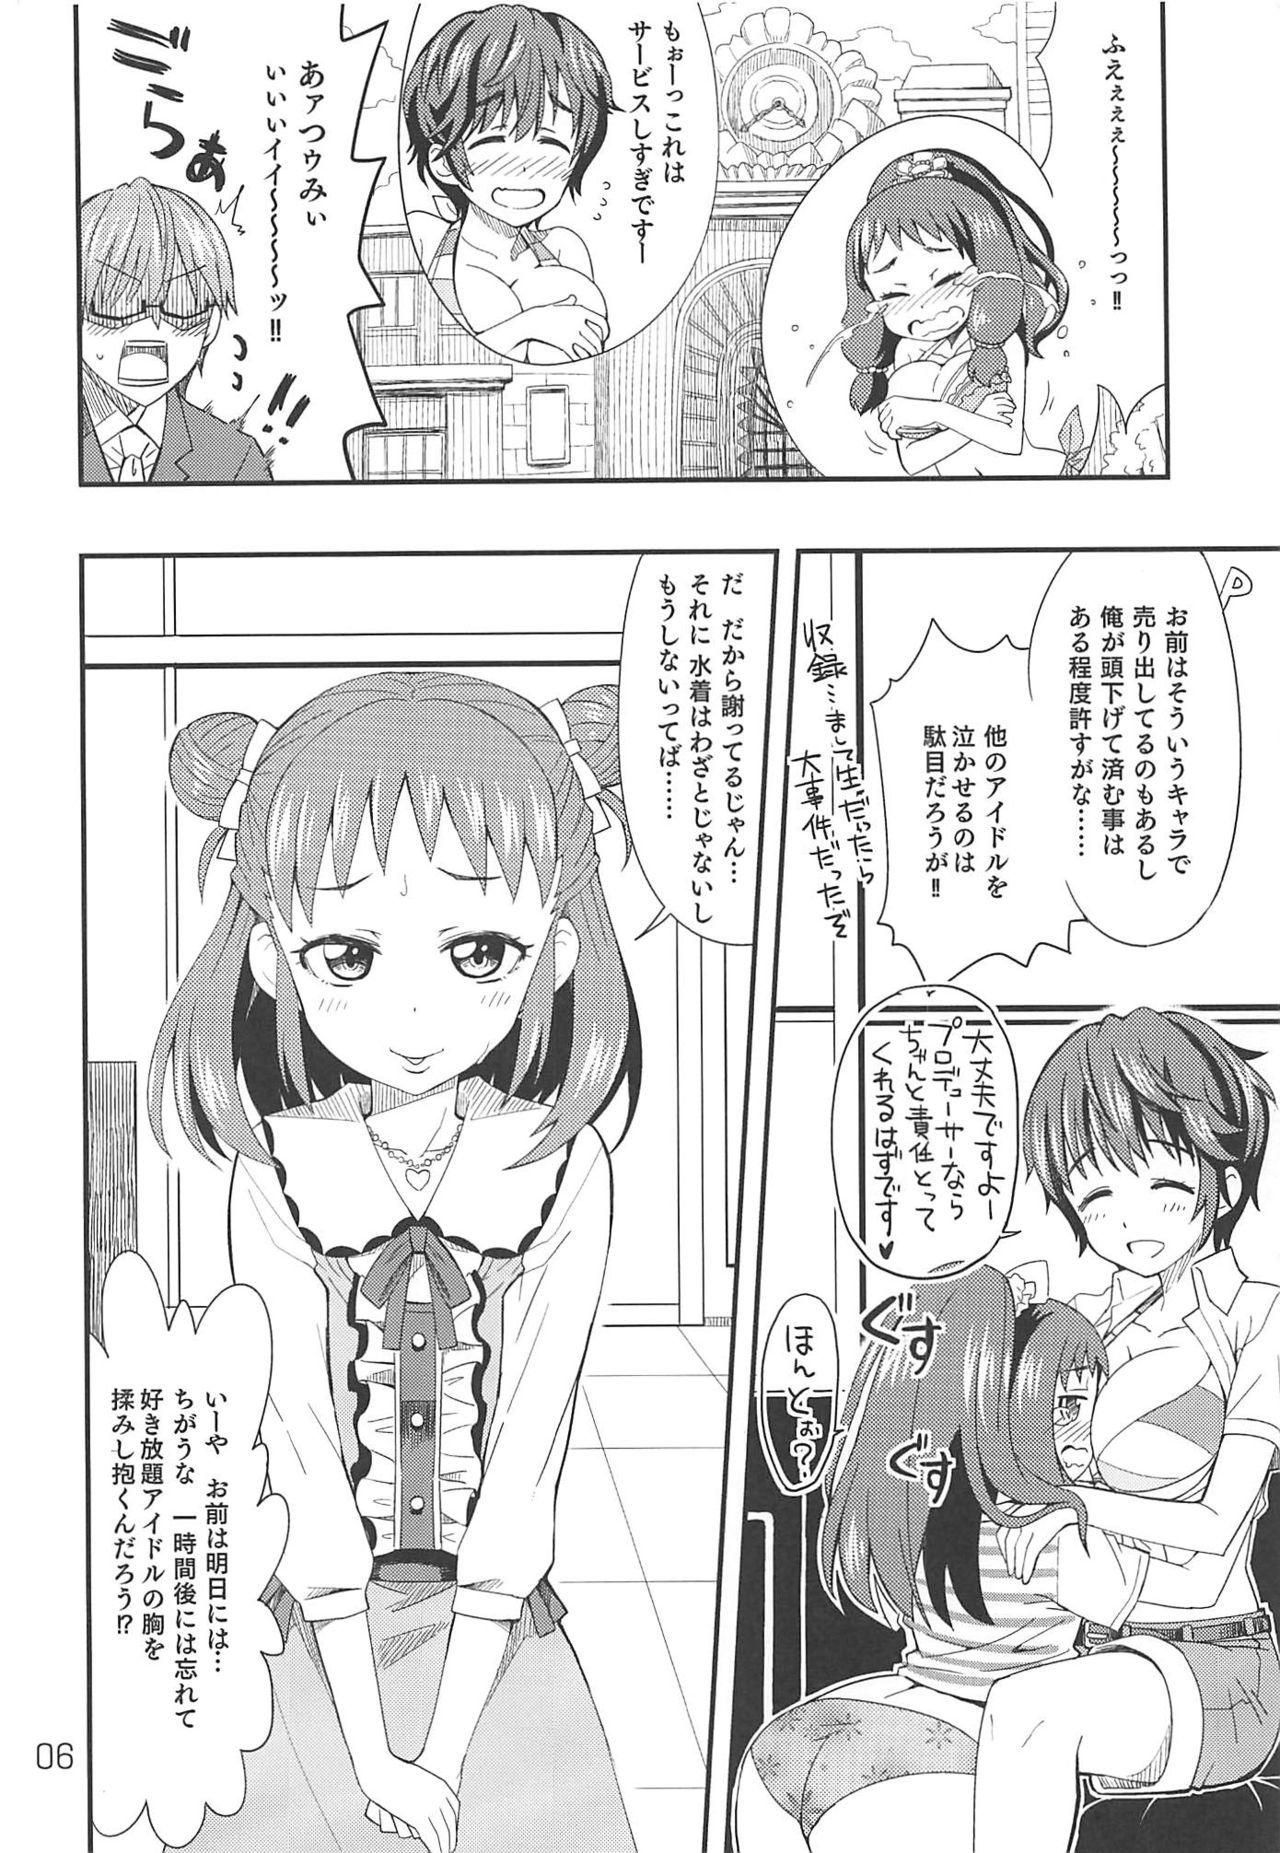 Submissive Wotometicm@ster - The idolmaster Sola - Page 5